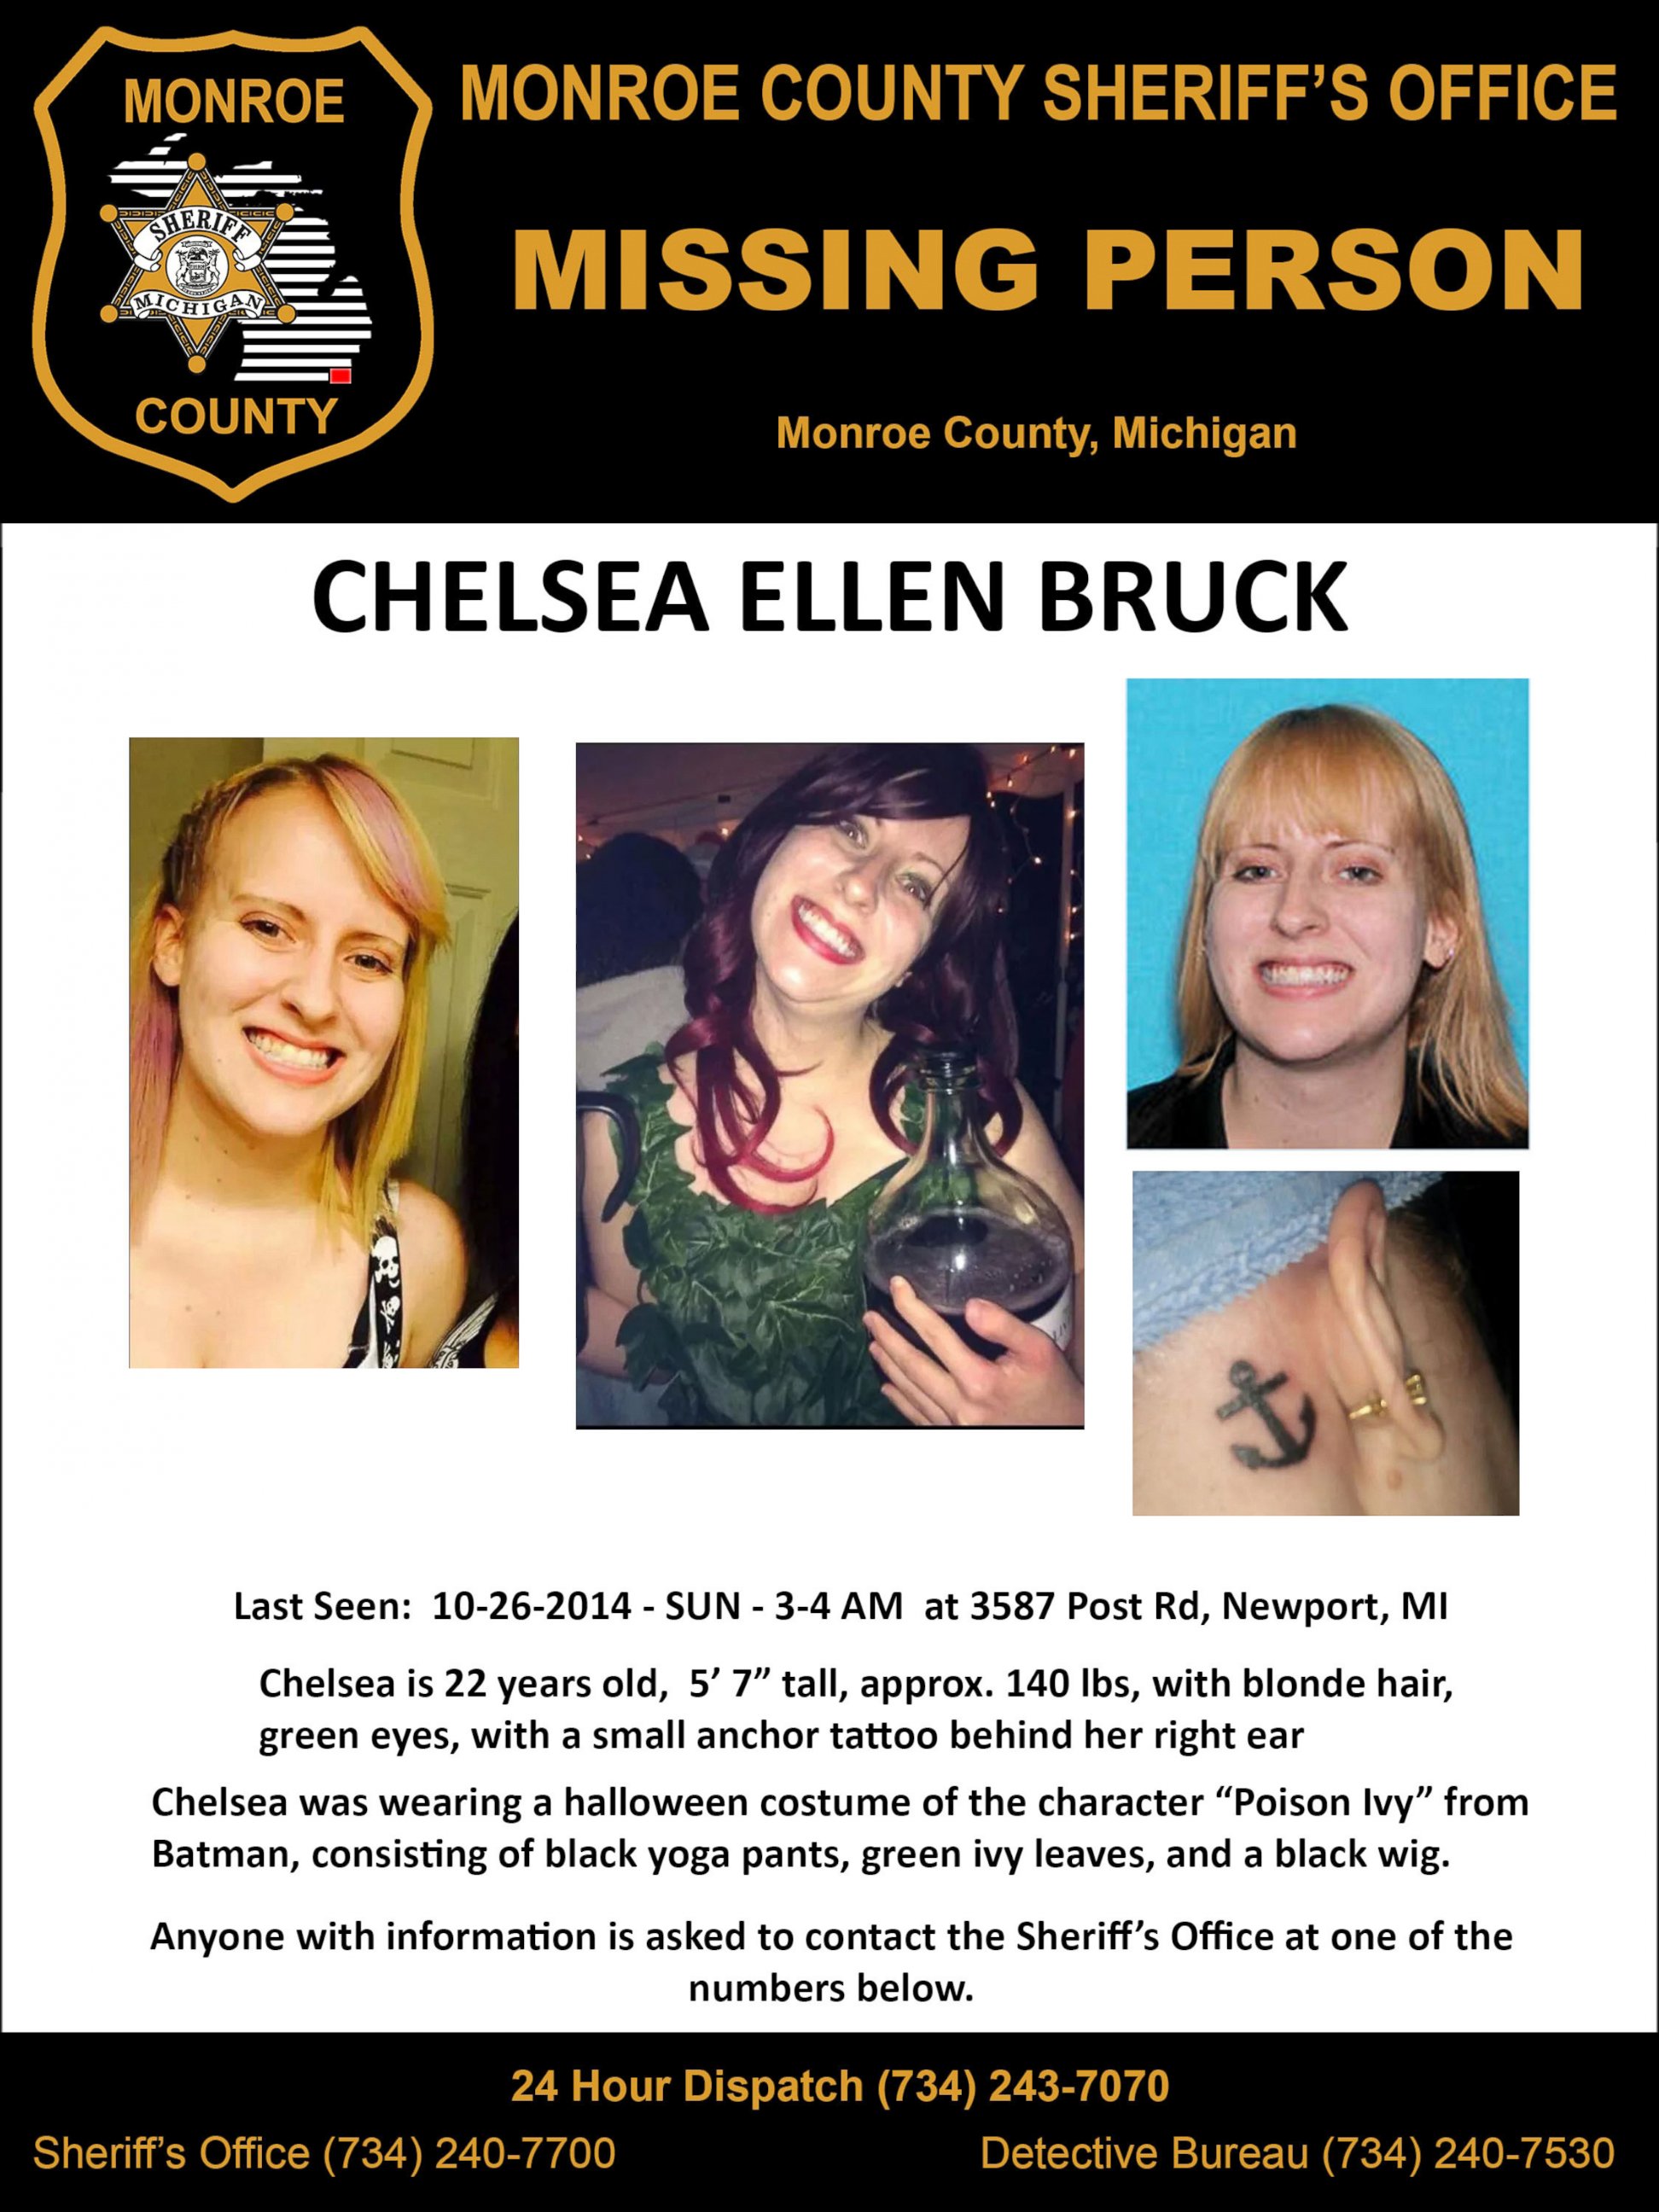 PHOTO: A search poster for Chelsea Bruck, provided by the Monroe County Sheriff's Office, is shown.